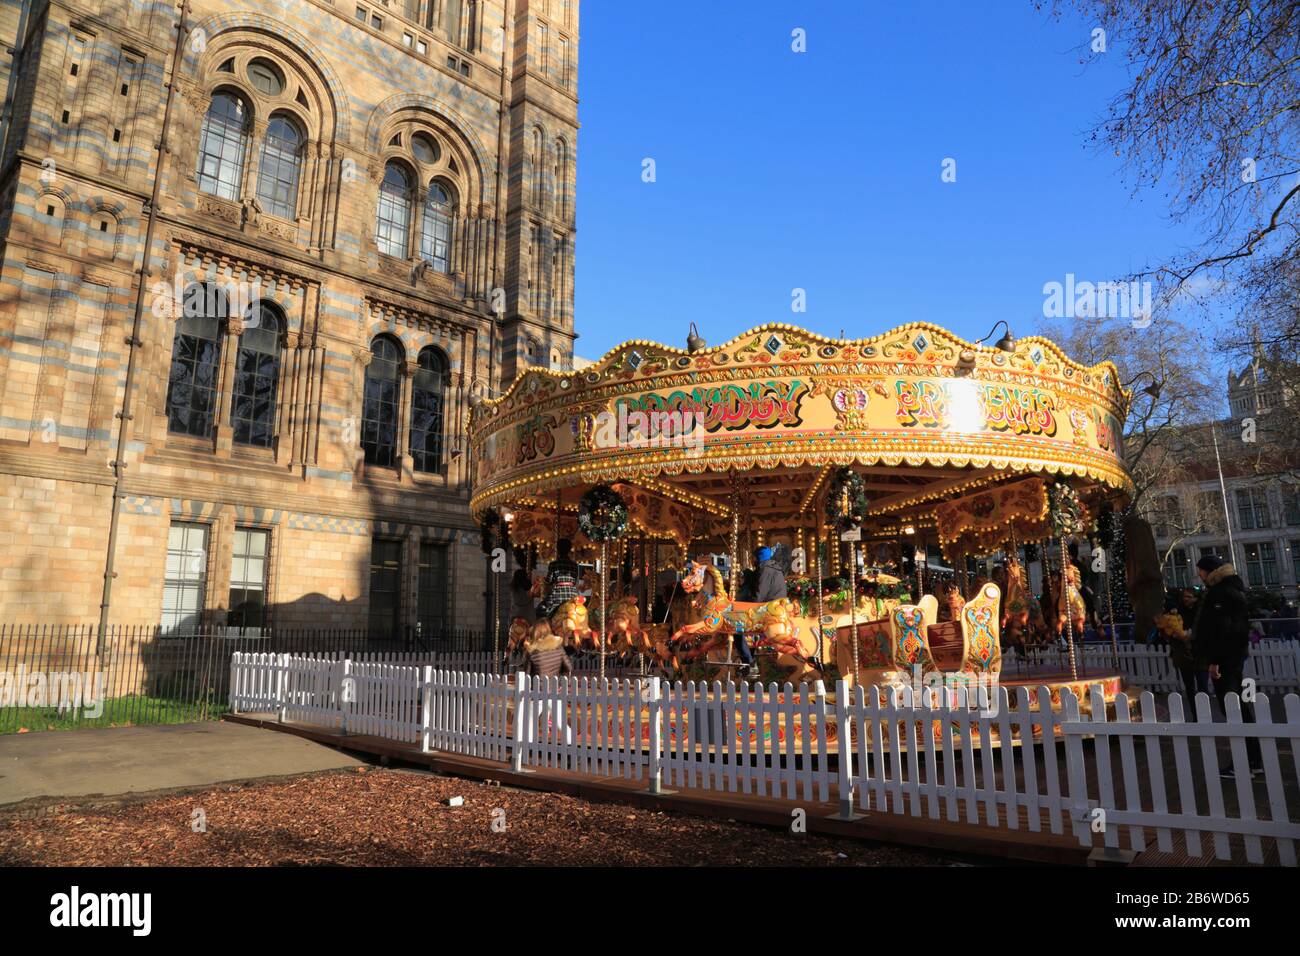 A carousel, as part of the Christmas holiday activities, outside the Natural History Museum in South Kensington, London, UK. Stock Photo